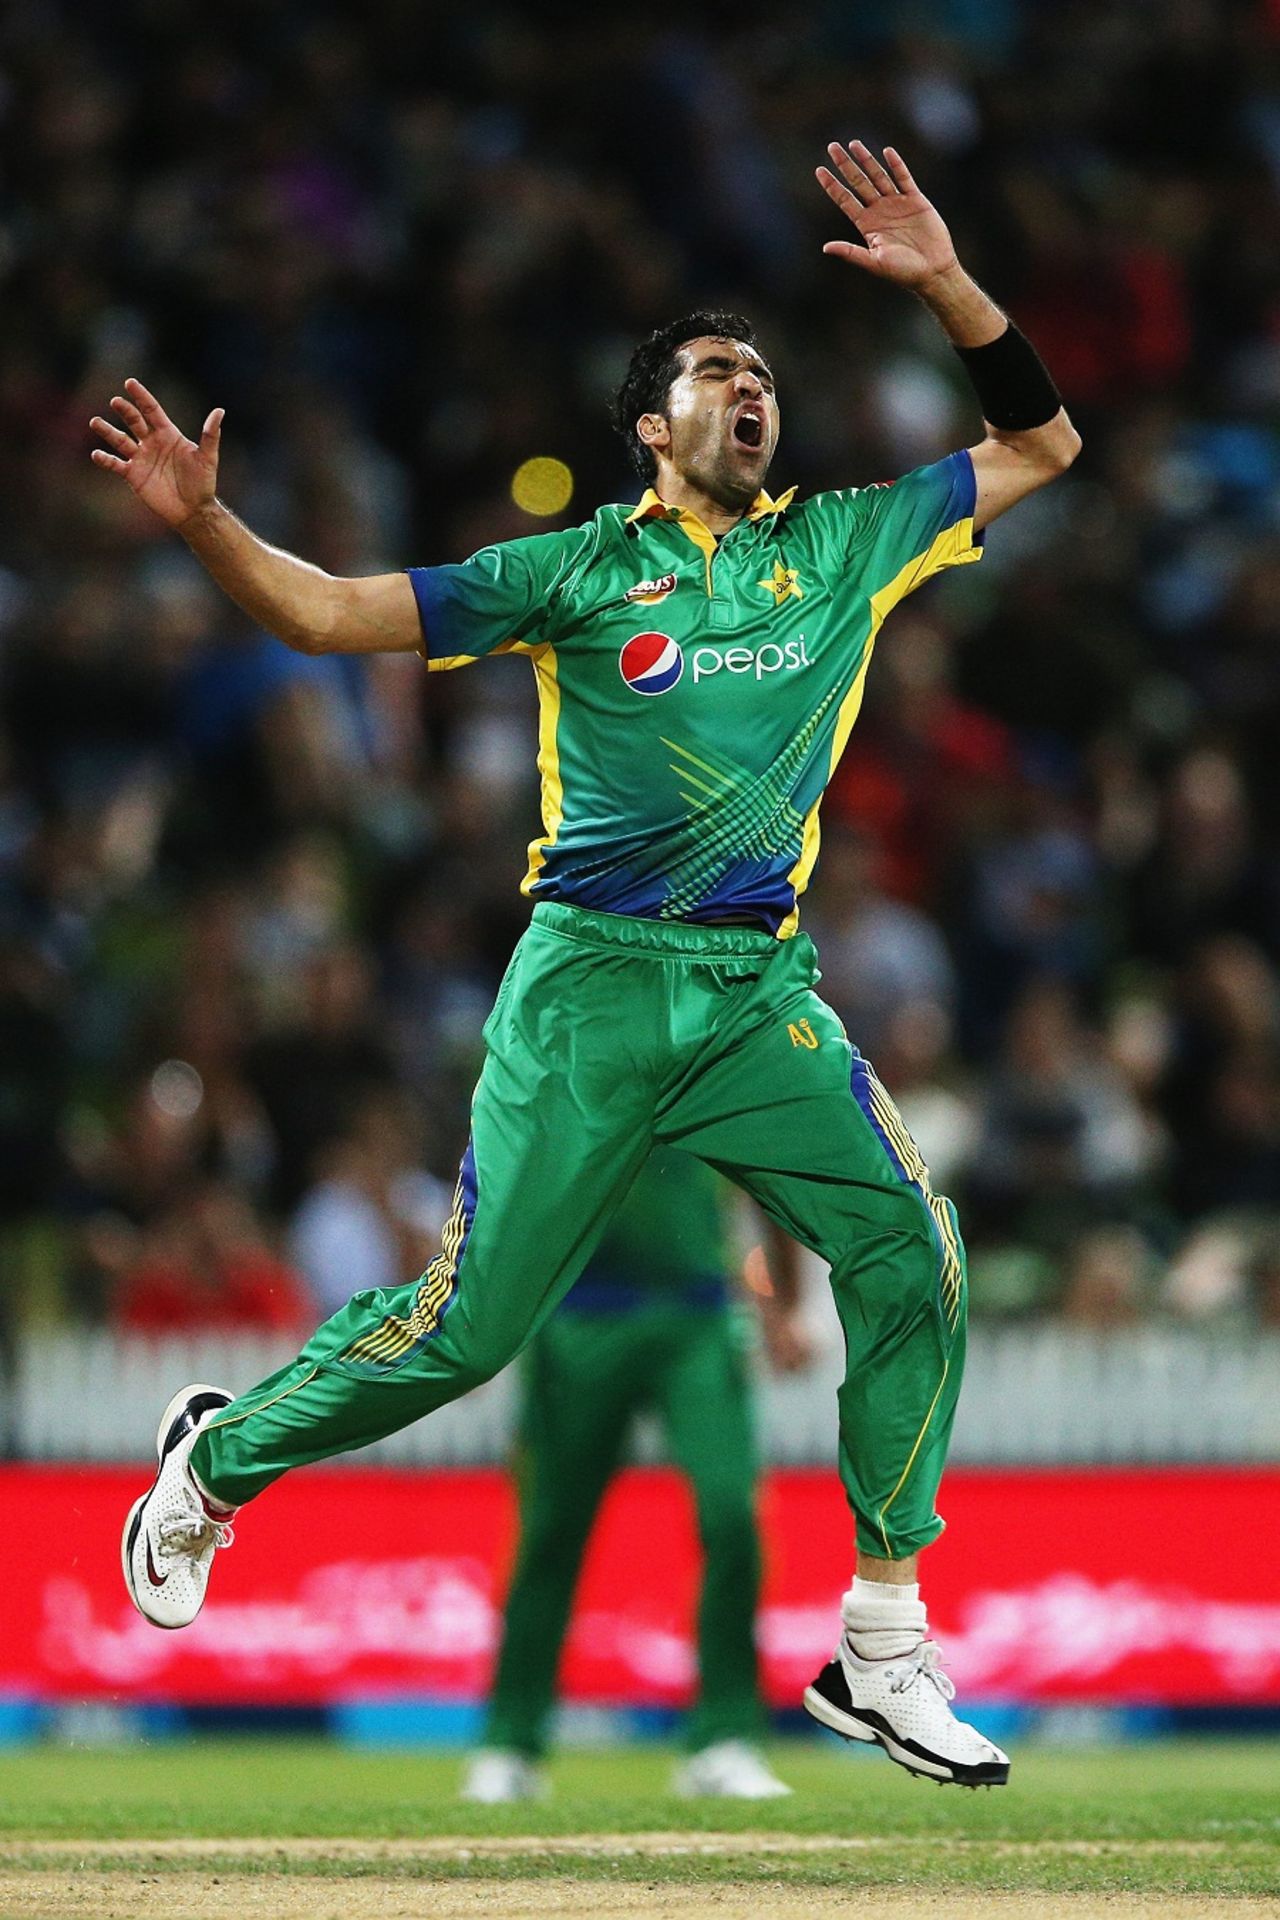 Umar Gul lets out a roar after a missed chance,  New Zealand v Pakistan, 2nd T20I, Hamilton, January 17, 2016